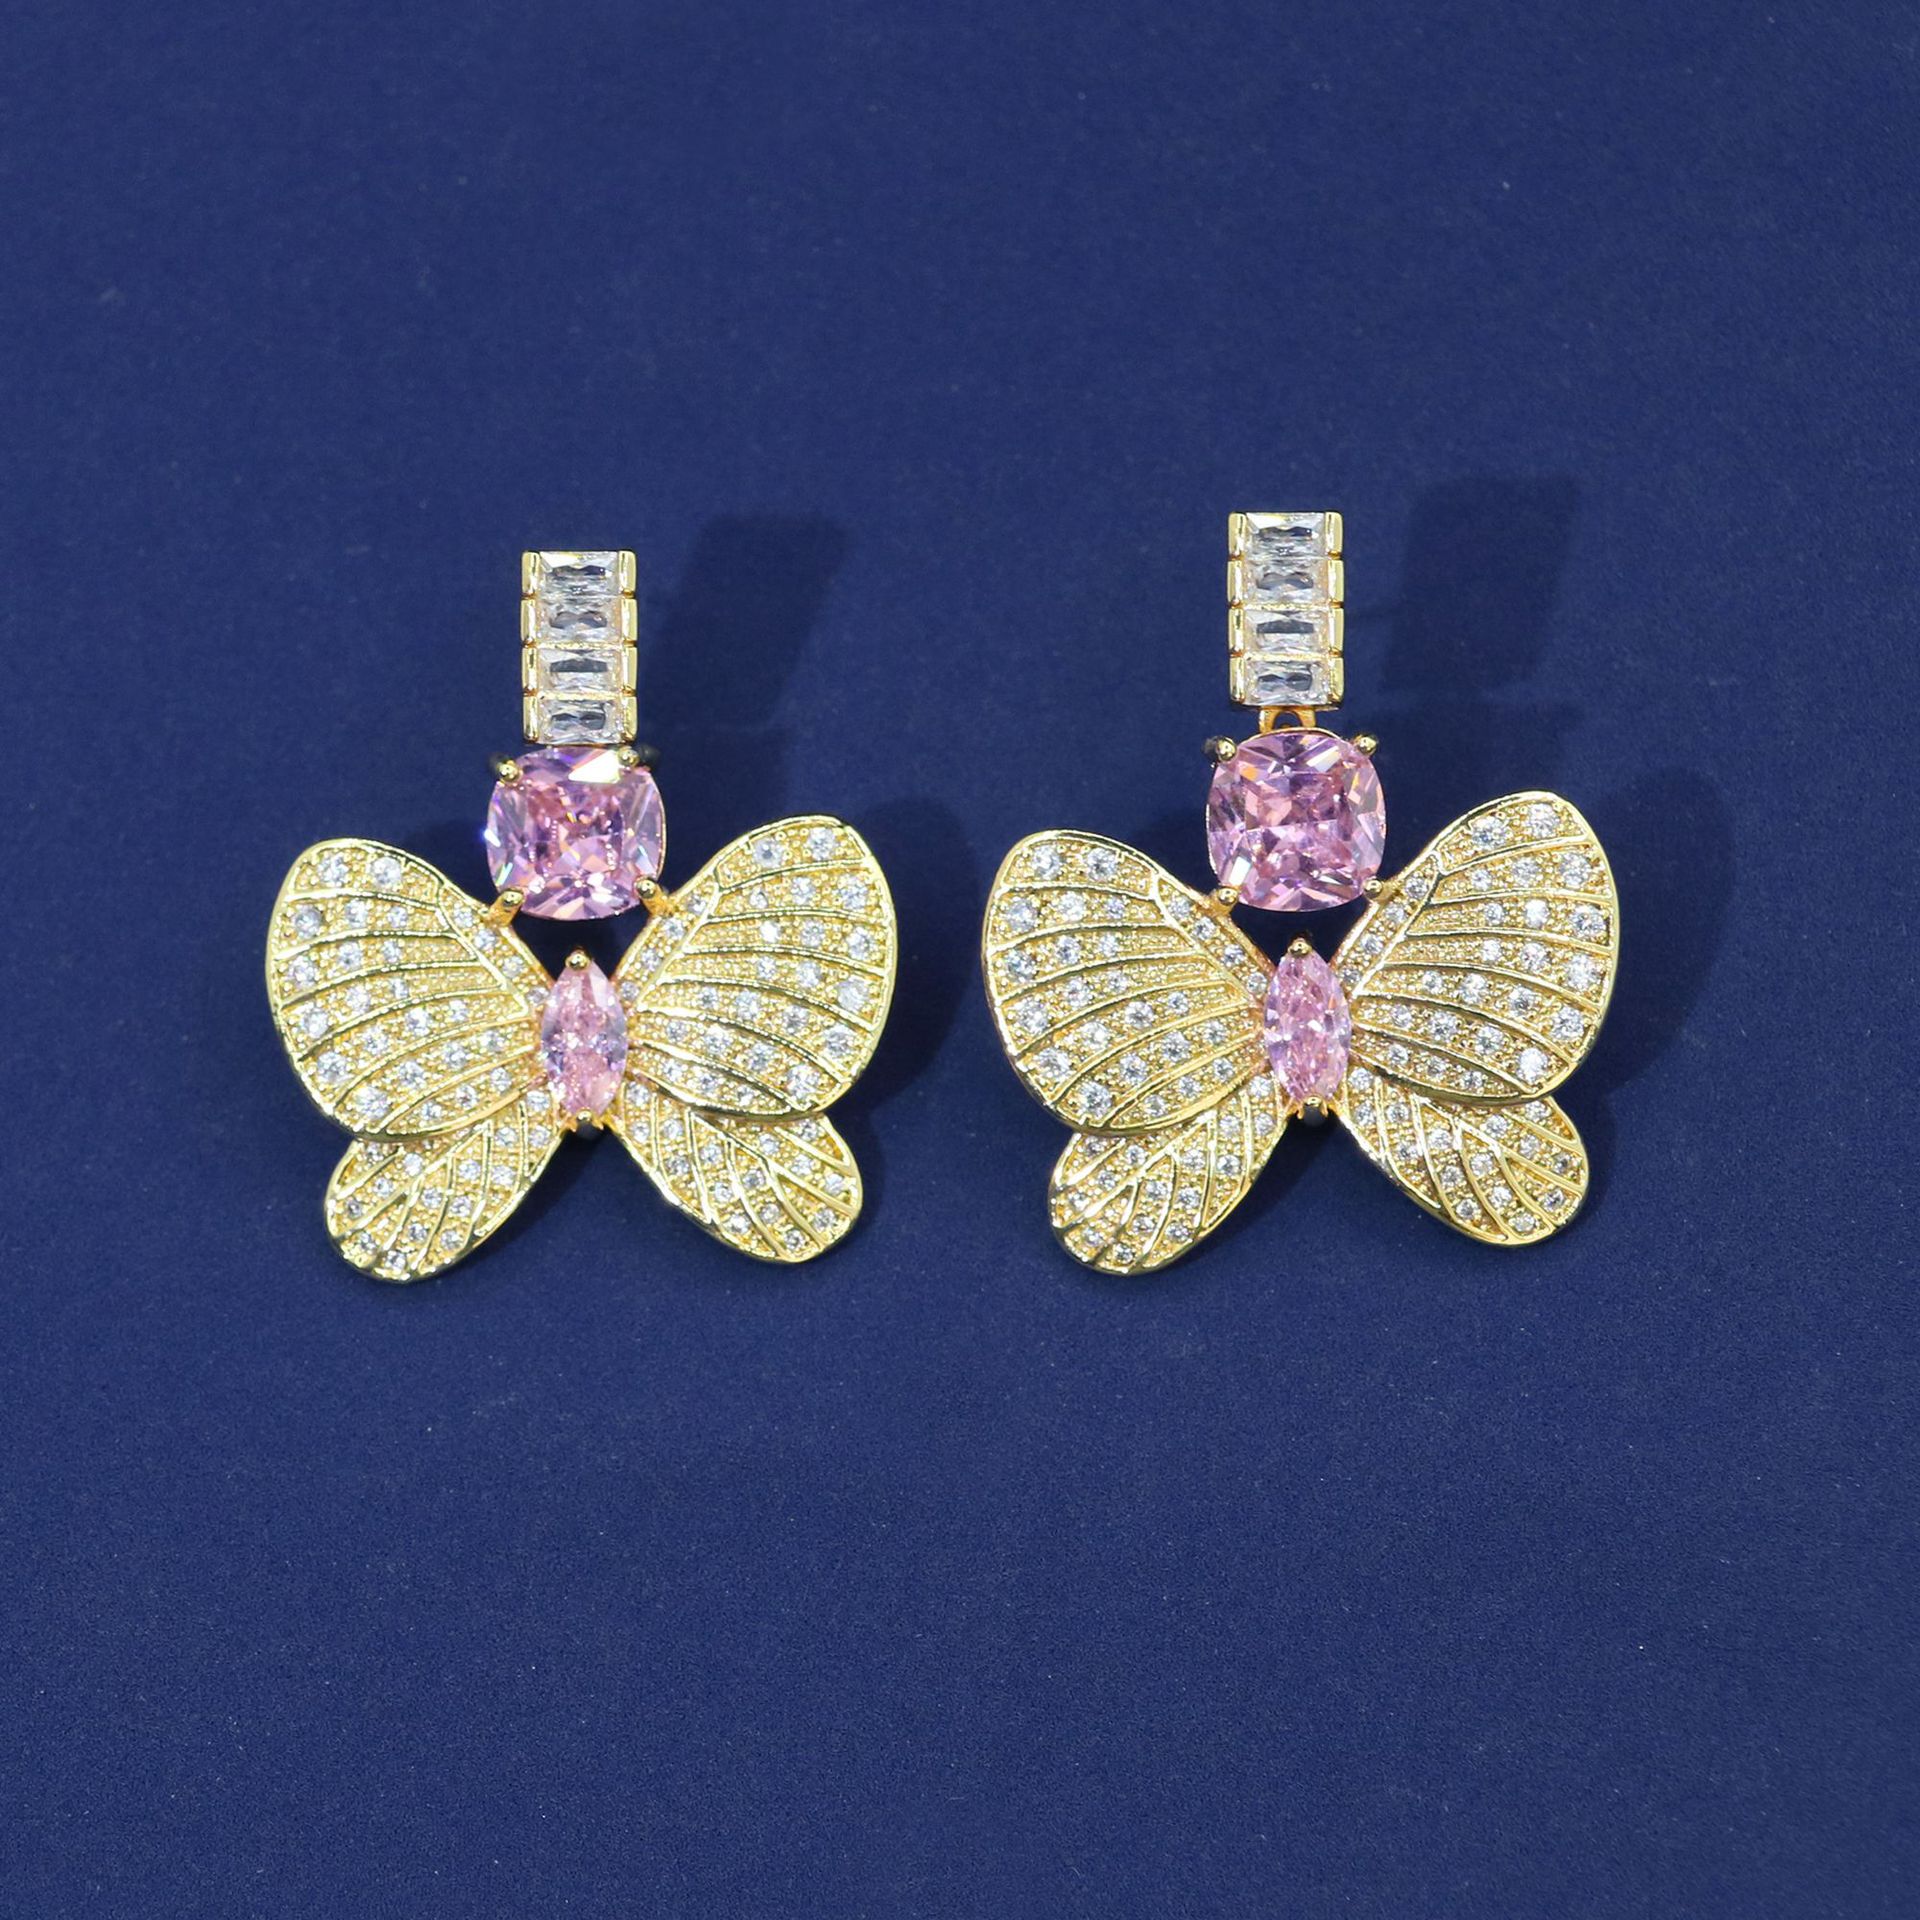 Zirconium earrings with gold foundation